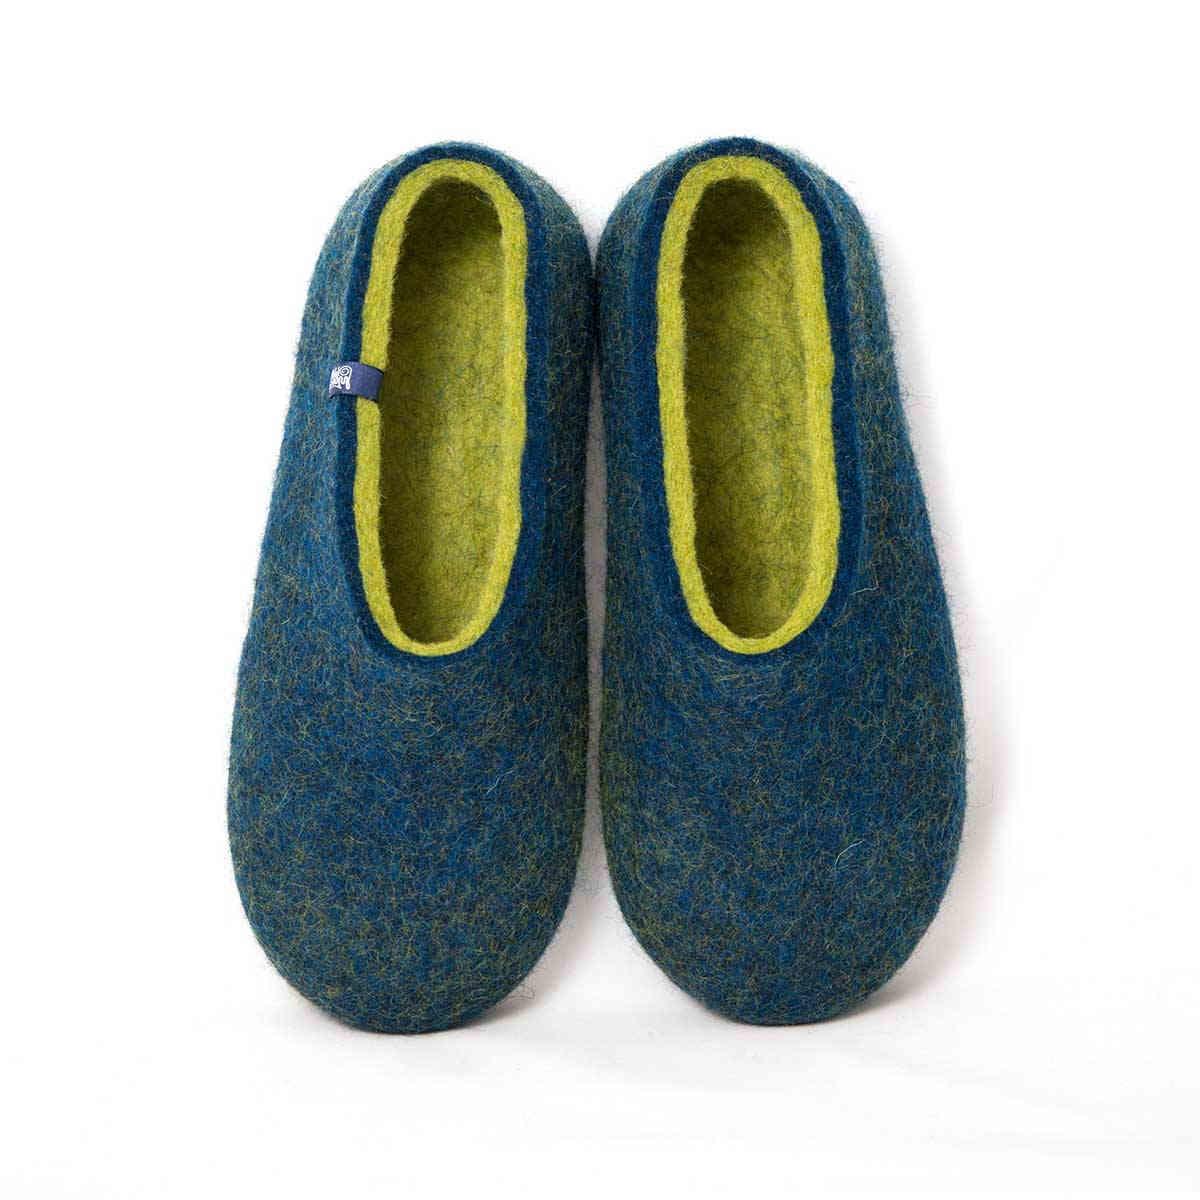 Wool slippers DUAL BLUE navy lime Women's Slippers, Women's Slippers, DUAL BLUE